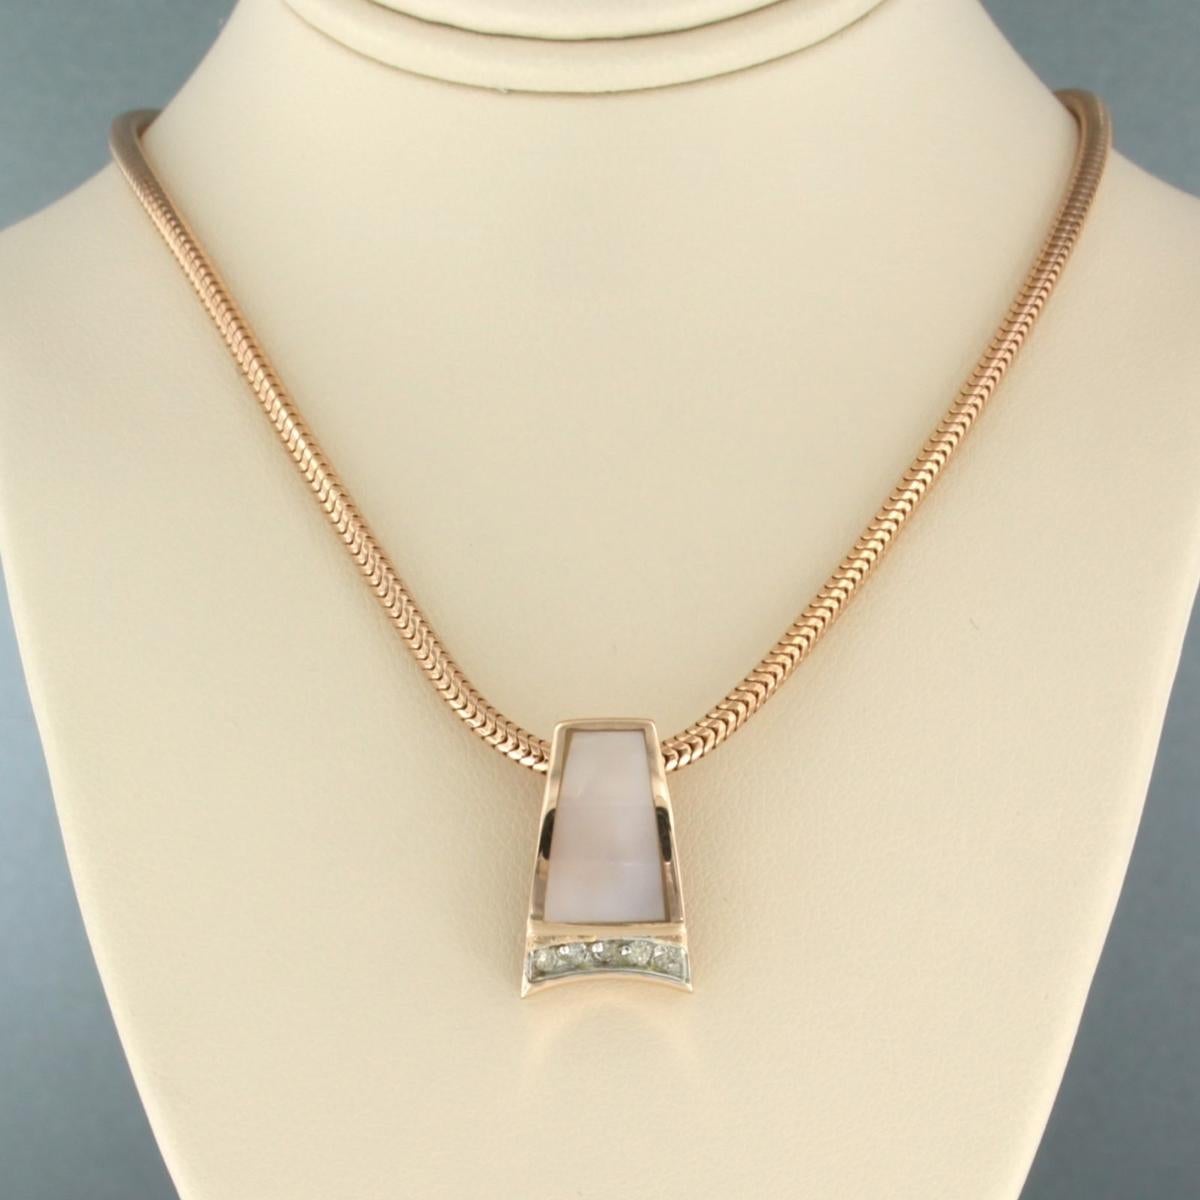 14k pink gold necklace with a bicolor gold pendant set with mother of pearl and brilliant cut diamonds. 0.15ct - 38cm long

detailed description:

The necklace is 37 cm long and 2.3 mm wide

the pendant is 1.9 cm high and 1.2 cm wide

Weight 18.4